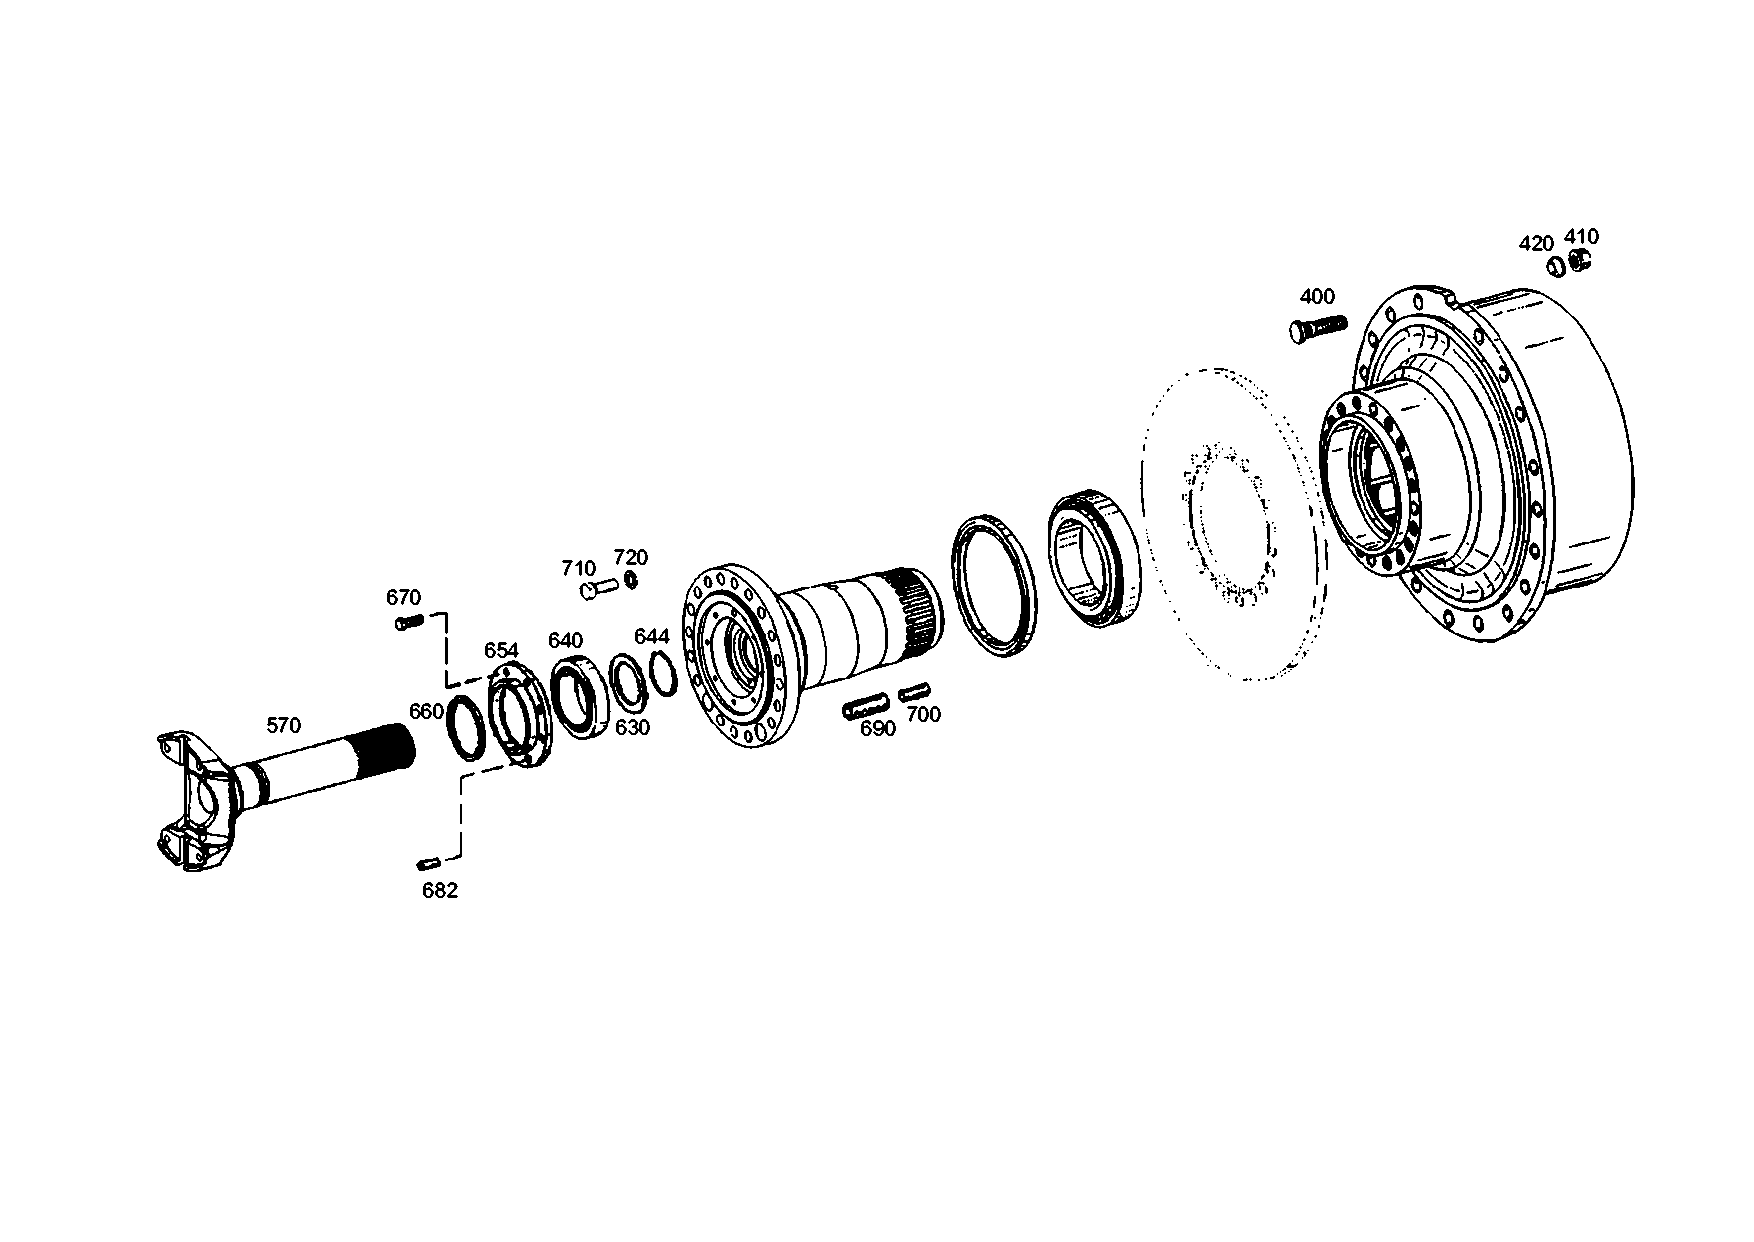 drawing for E. N. M. T. P. / CPG 400086680 - SPRING WASHER (figure 3)